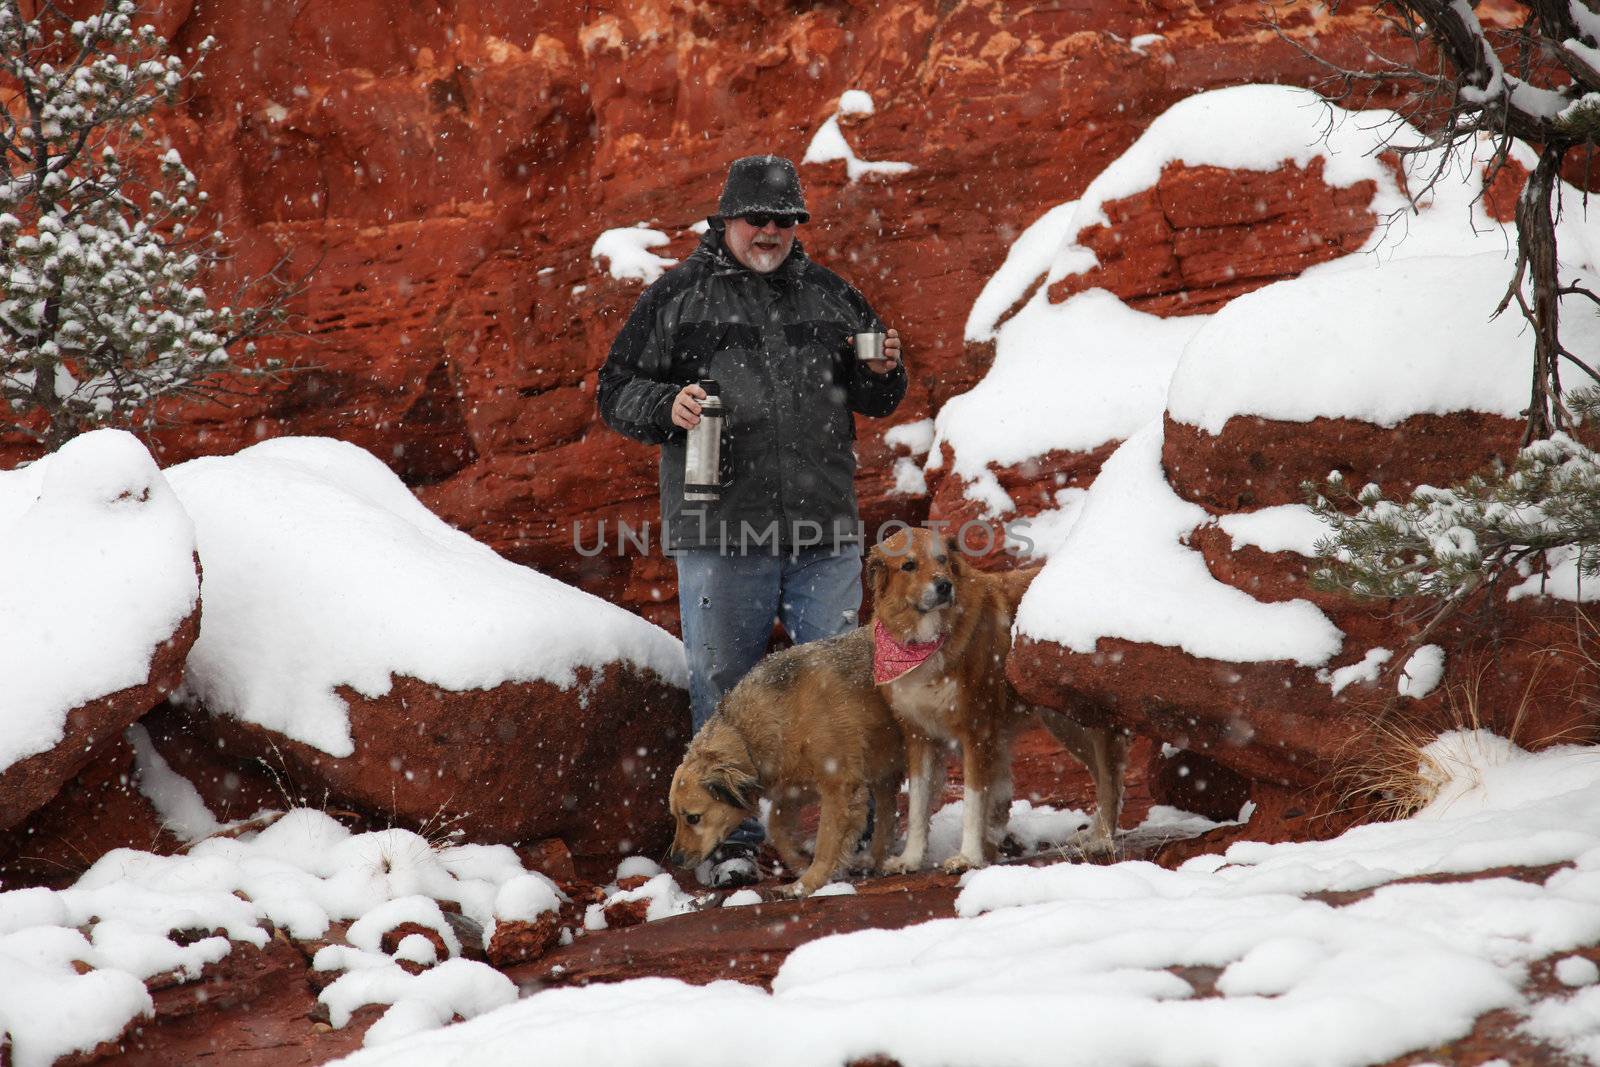 Mature caucasion man walking his dogs during a snowstorm in the Colorado high country, stops for a warming cup of coffee from his vacuum bottle.